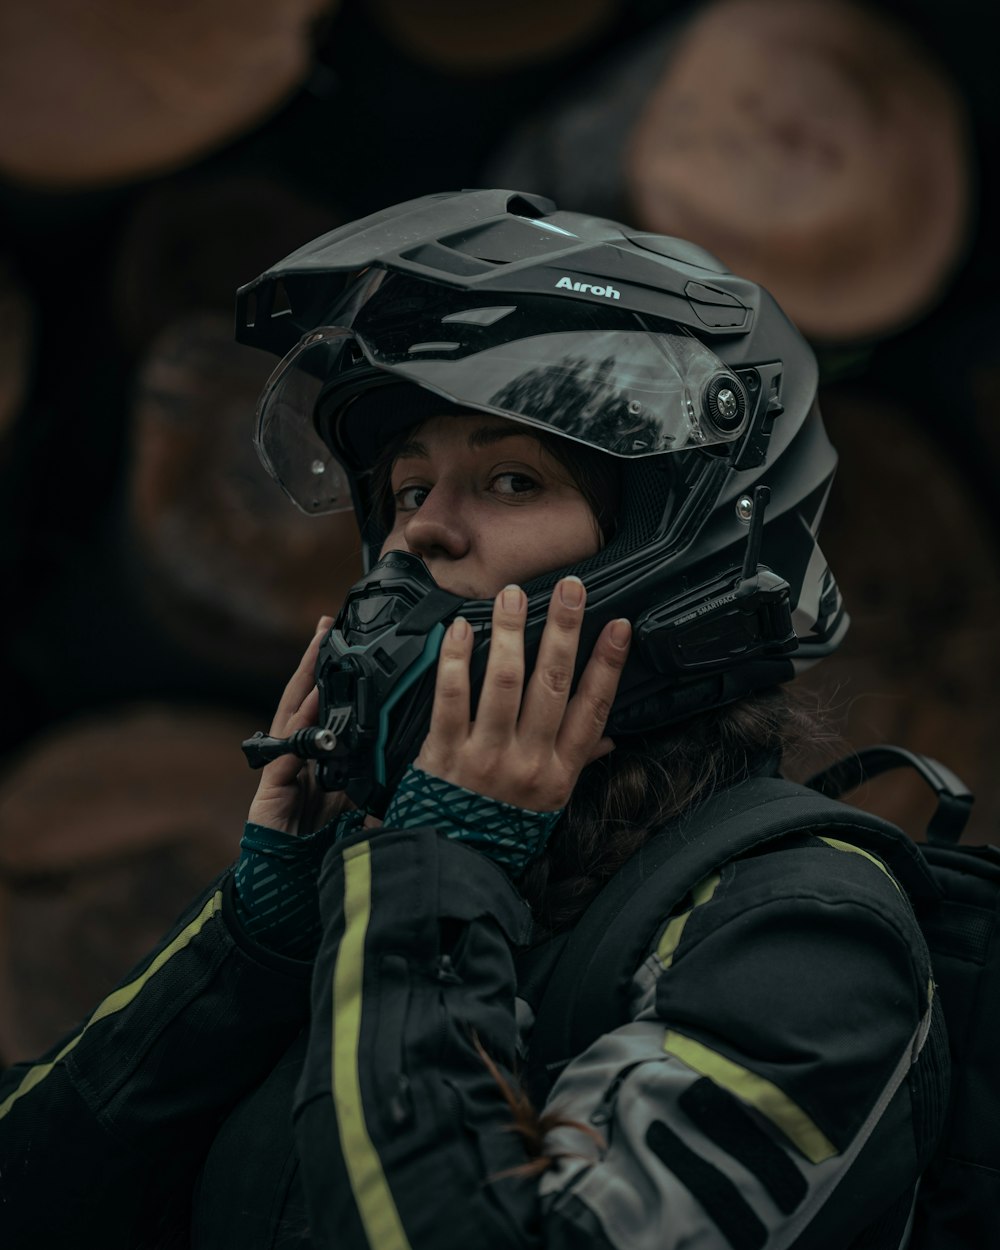 a woman wearing a helmet talking on a cell phone